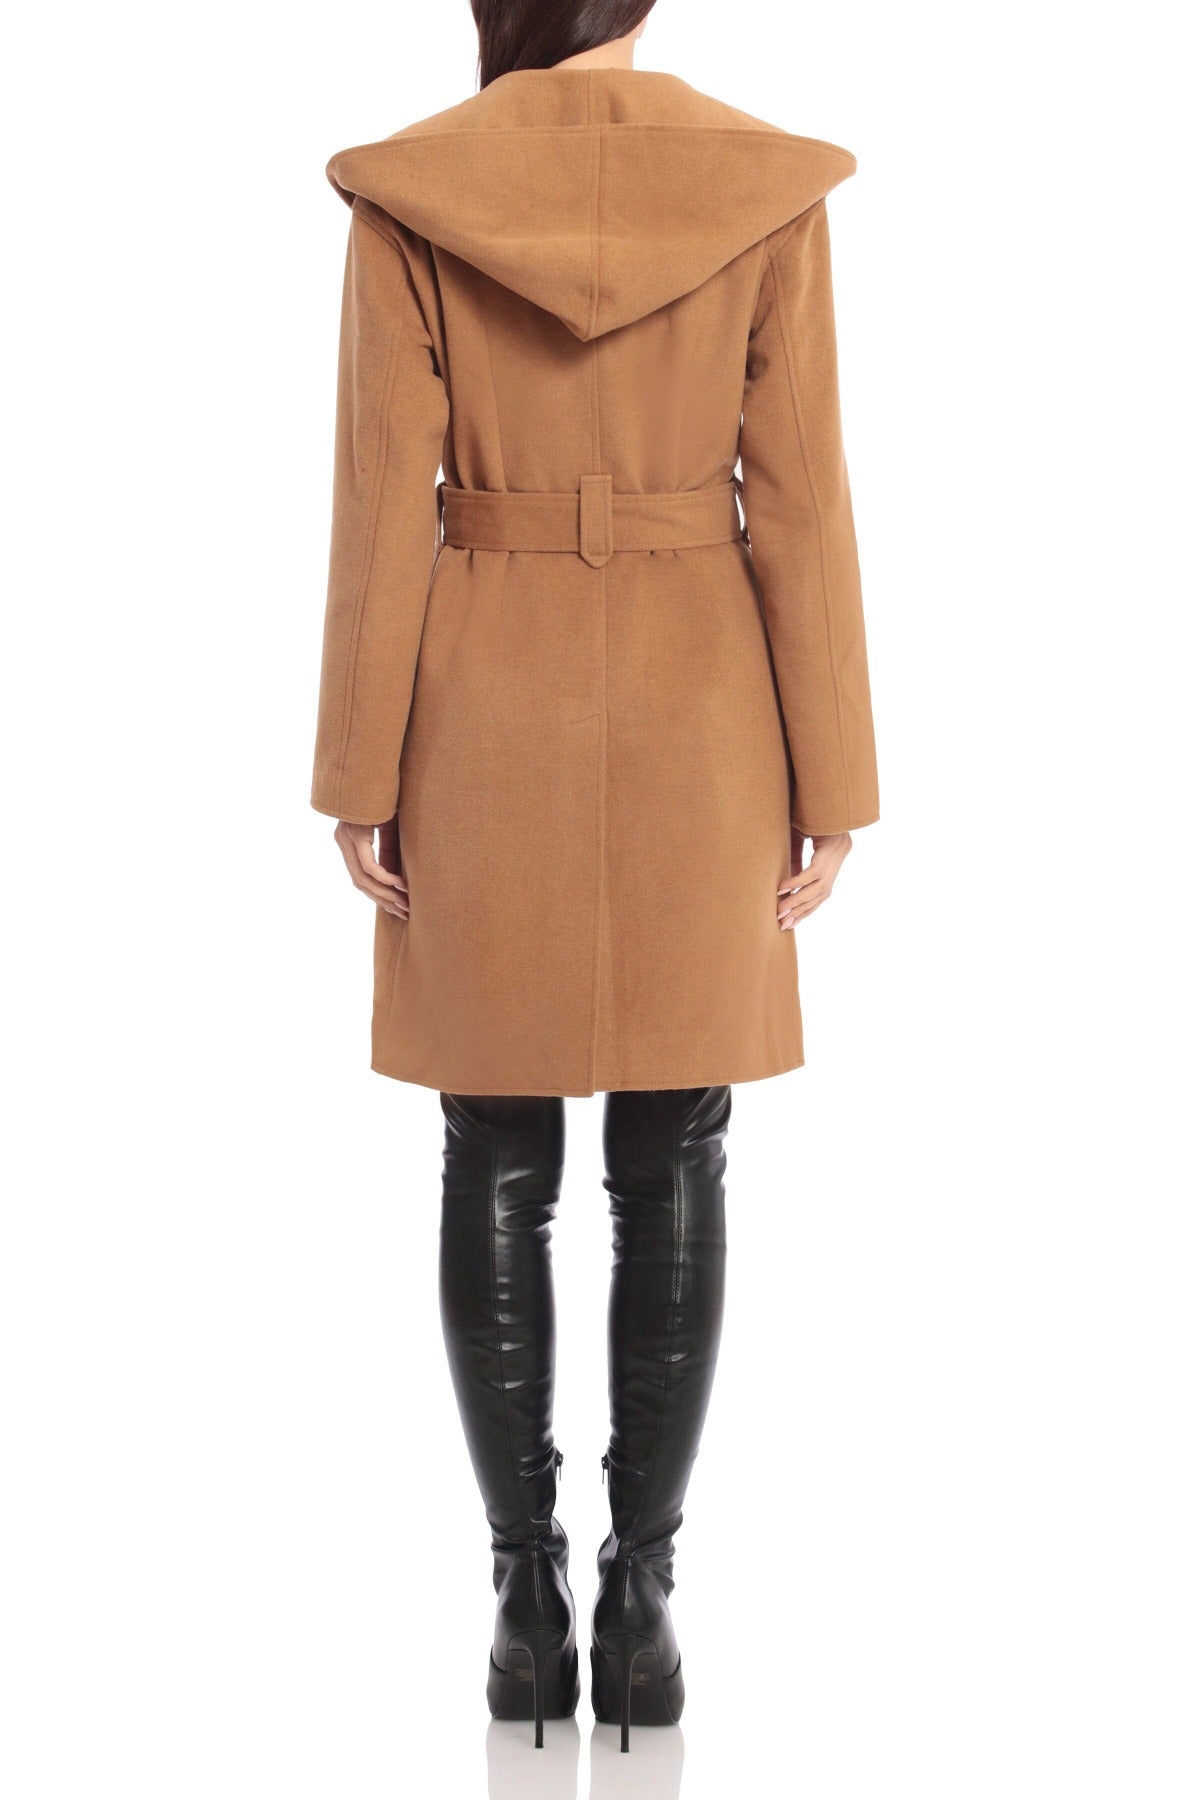 Brown hooded wool-blend belted midi coat jacket - women's figure flattering casual to dressy coats outerwear for Fall 2023 fashion trends